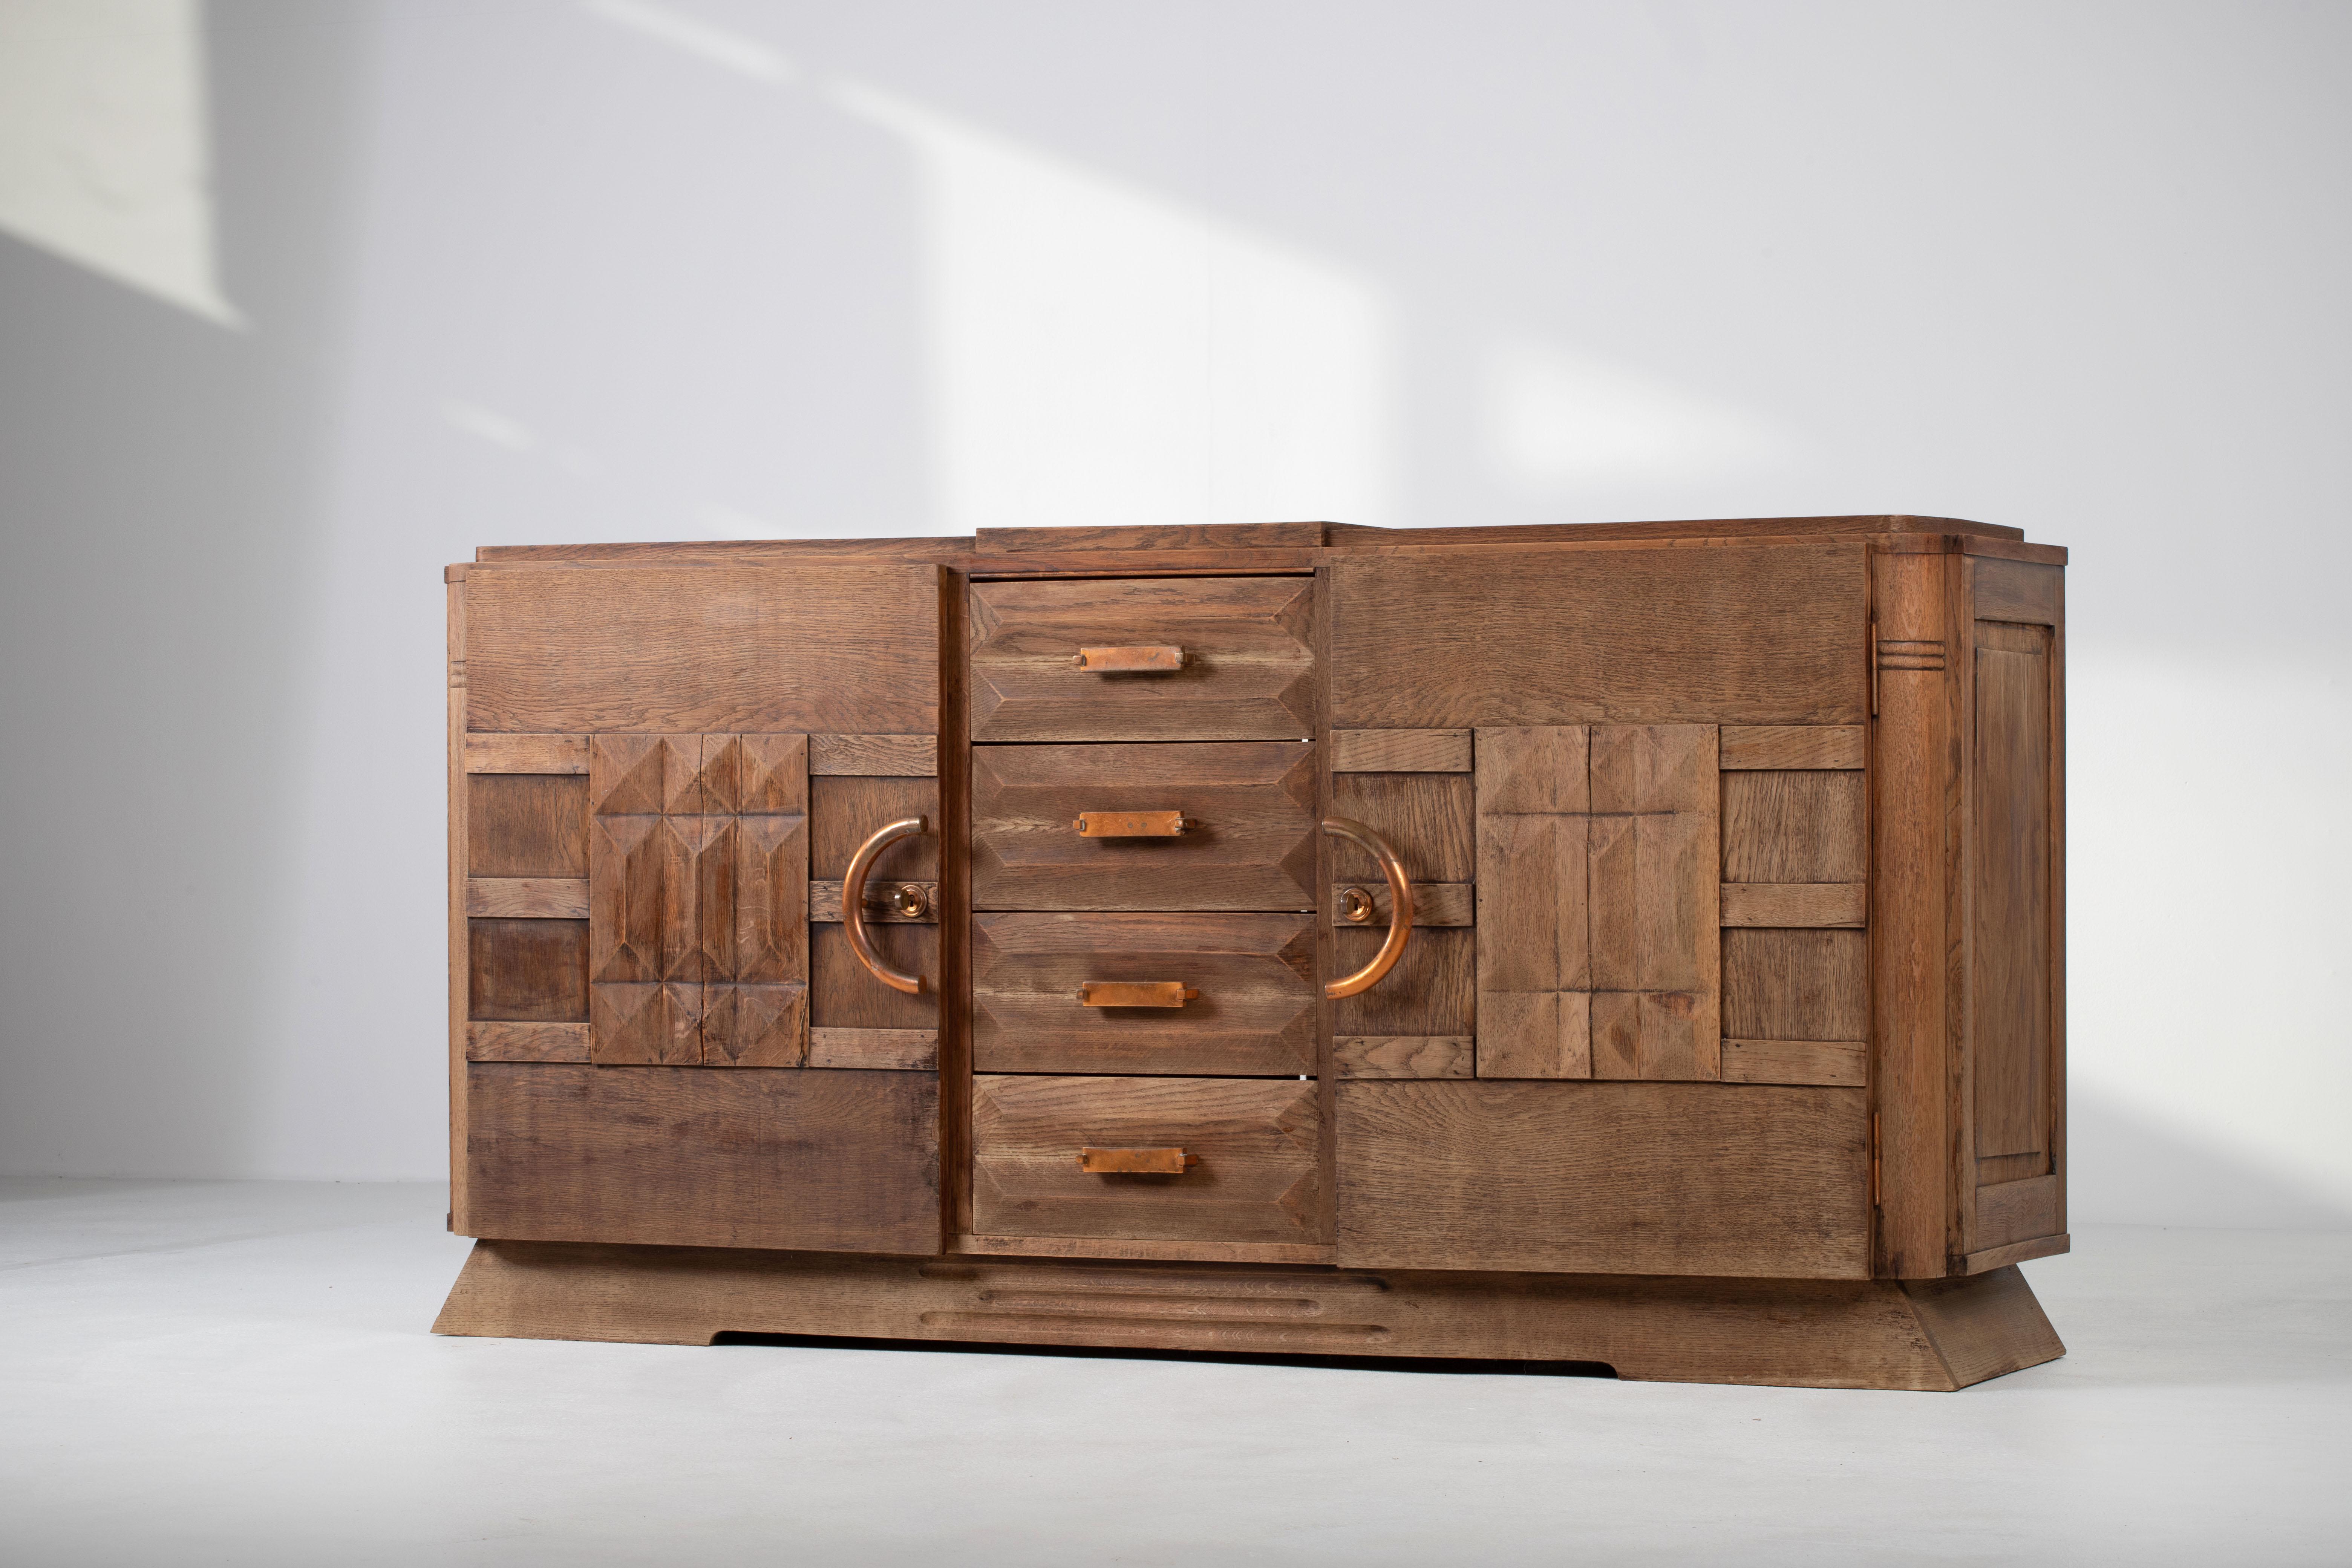 Bleached Solid Oak Credenza with Graphic Details, France, 1940s For Sale 2